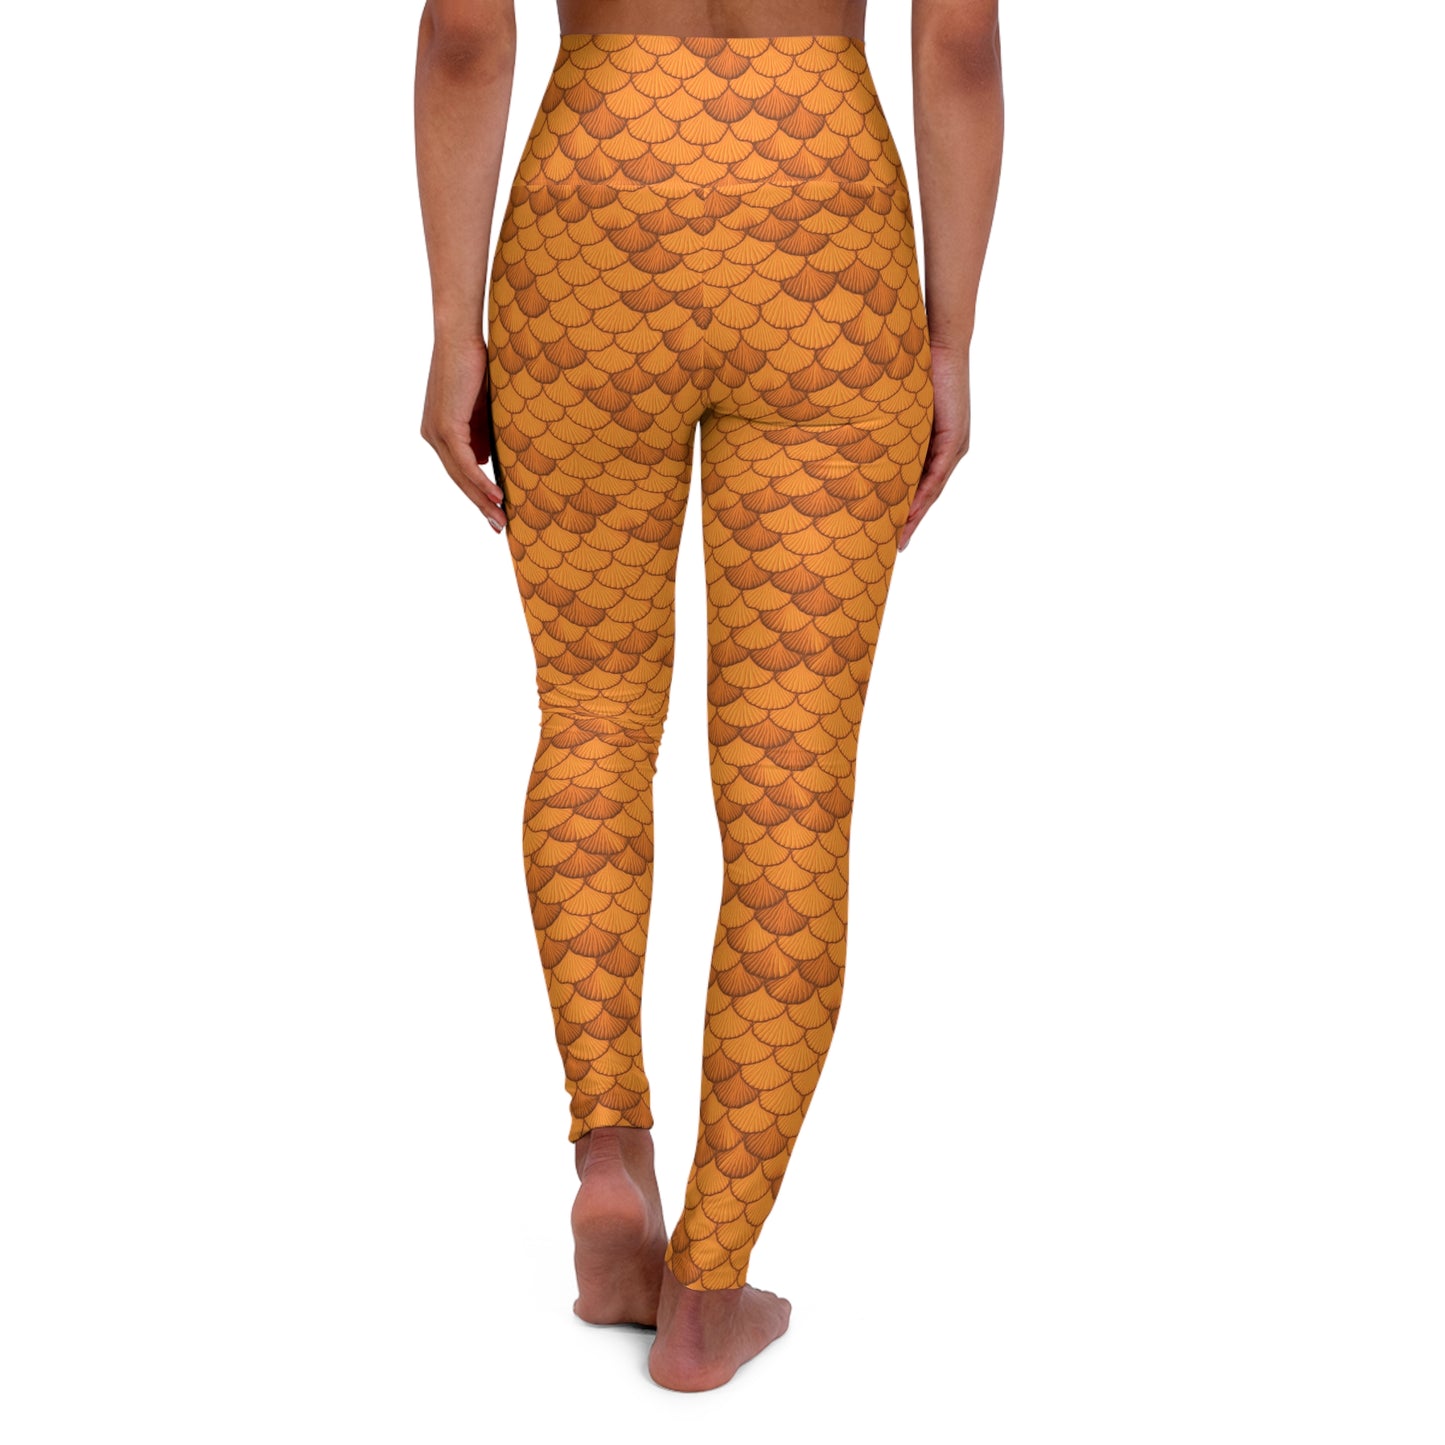 High Waisted - Ignite Your Inner Mermaid with Orange Seashell Mermaid Yoga Leggings - Dive into a Magical and Mystical Ocean Adventure!